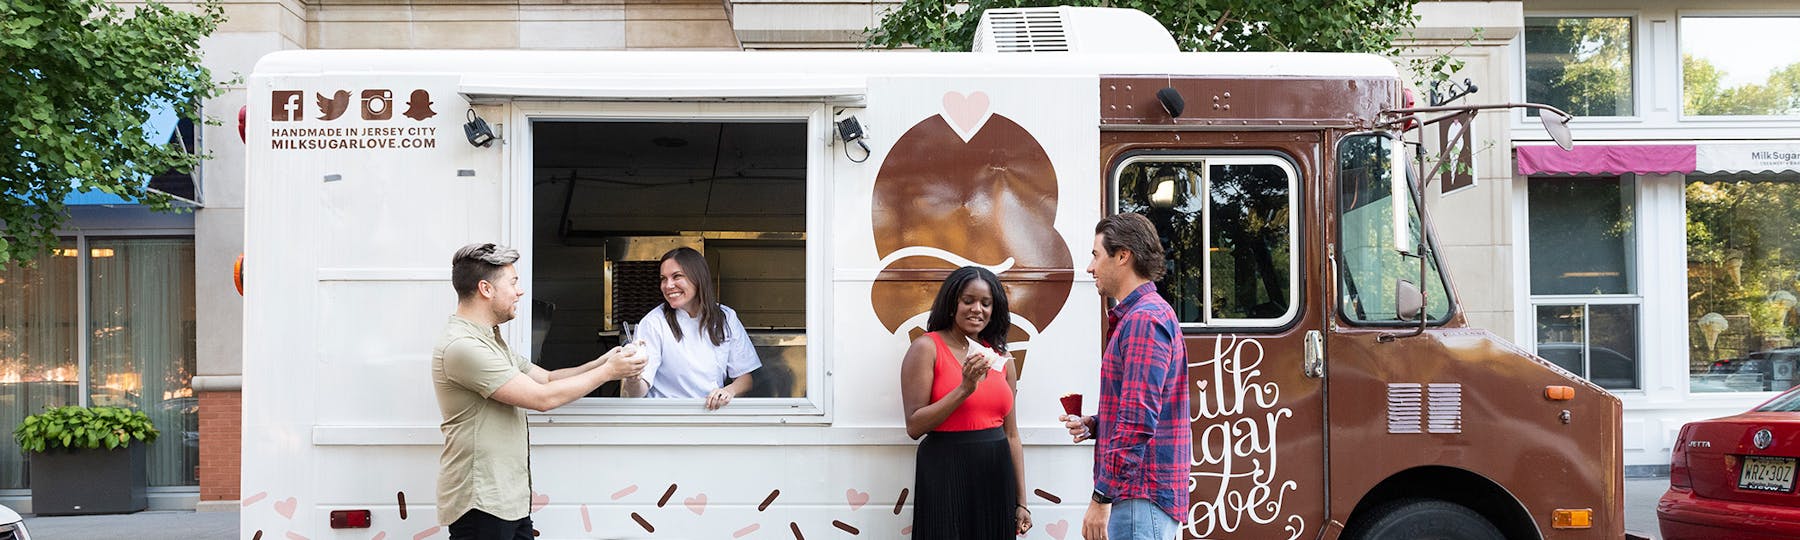 a group of people at an ice cream truck